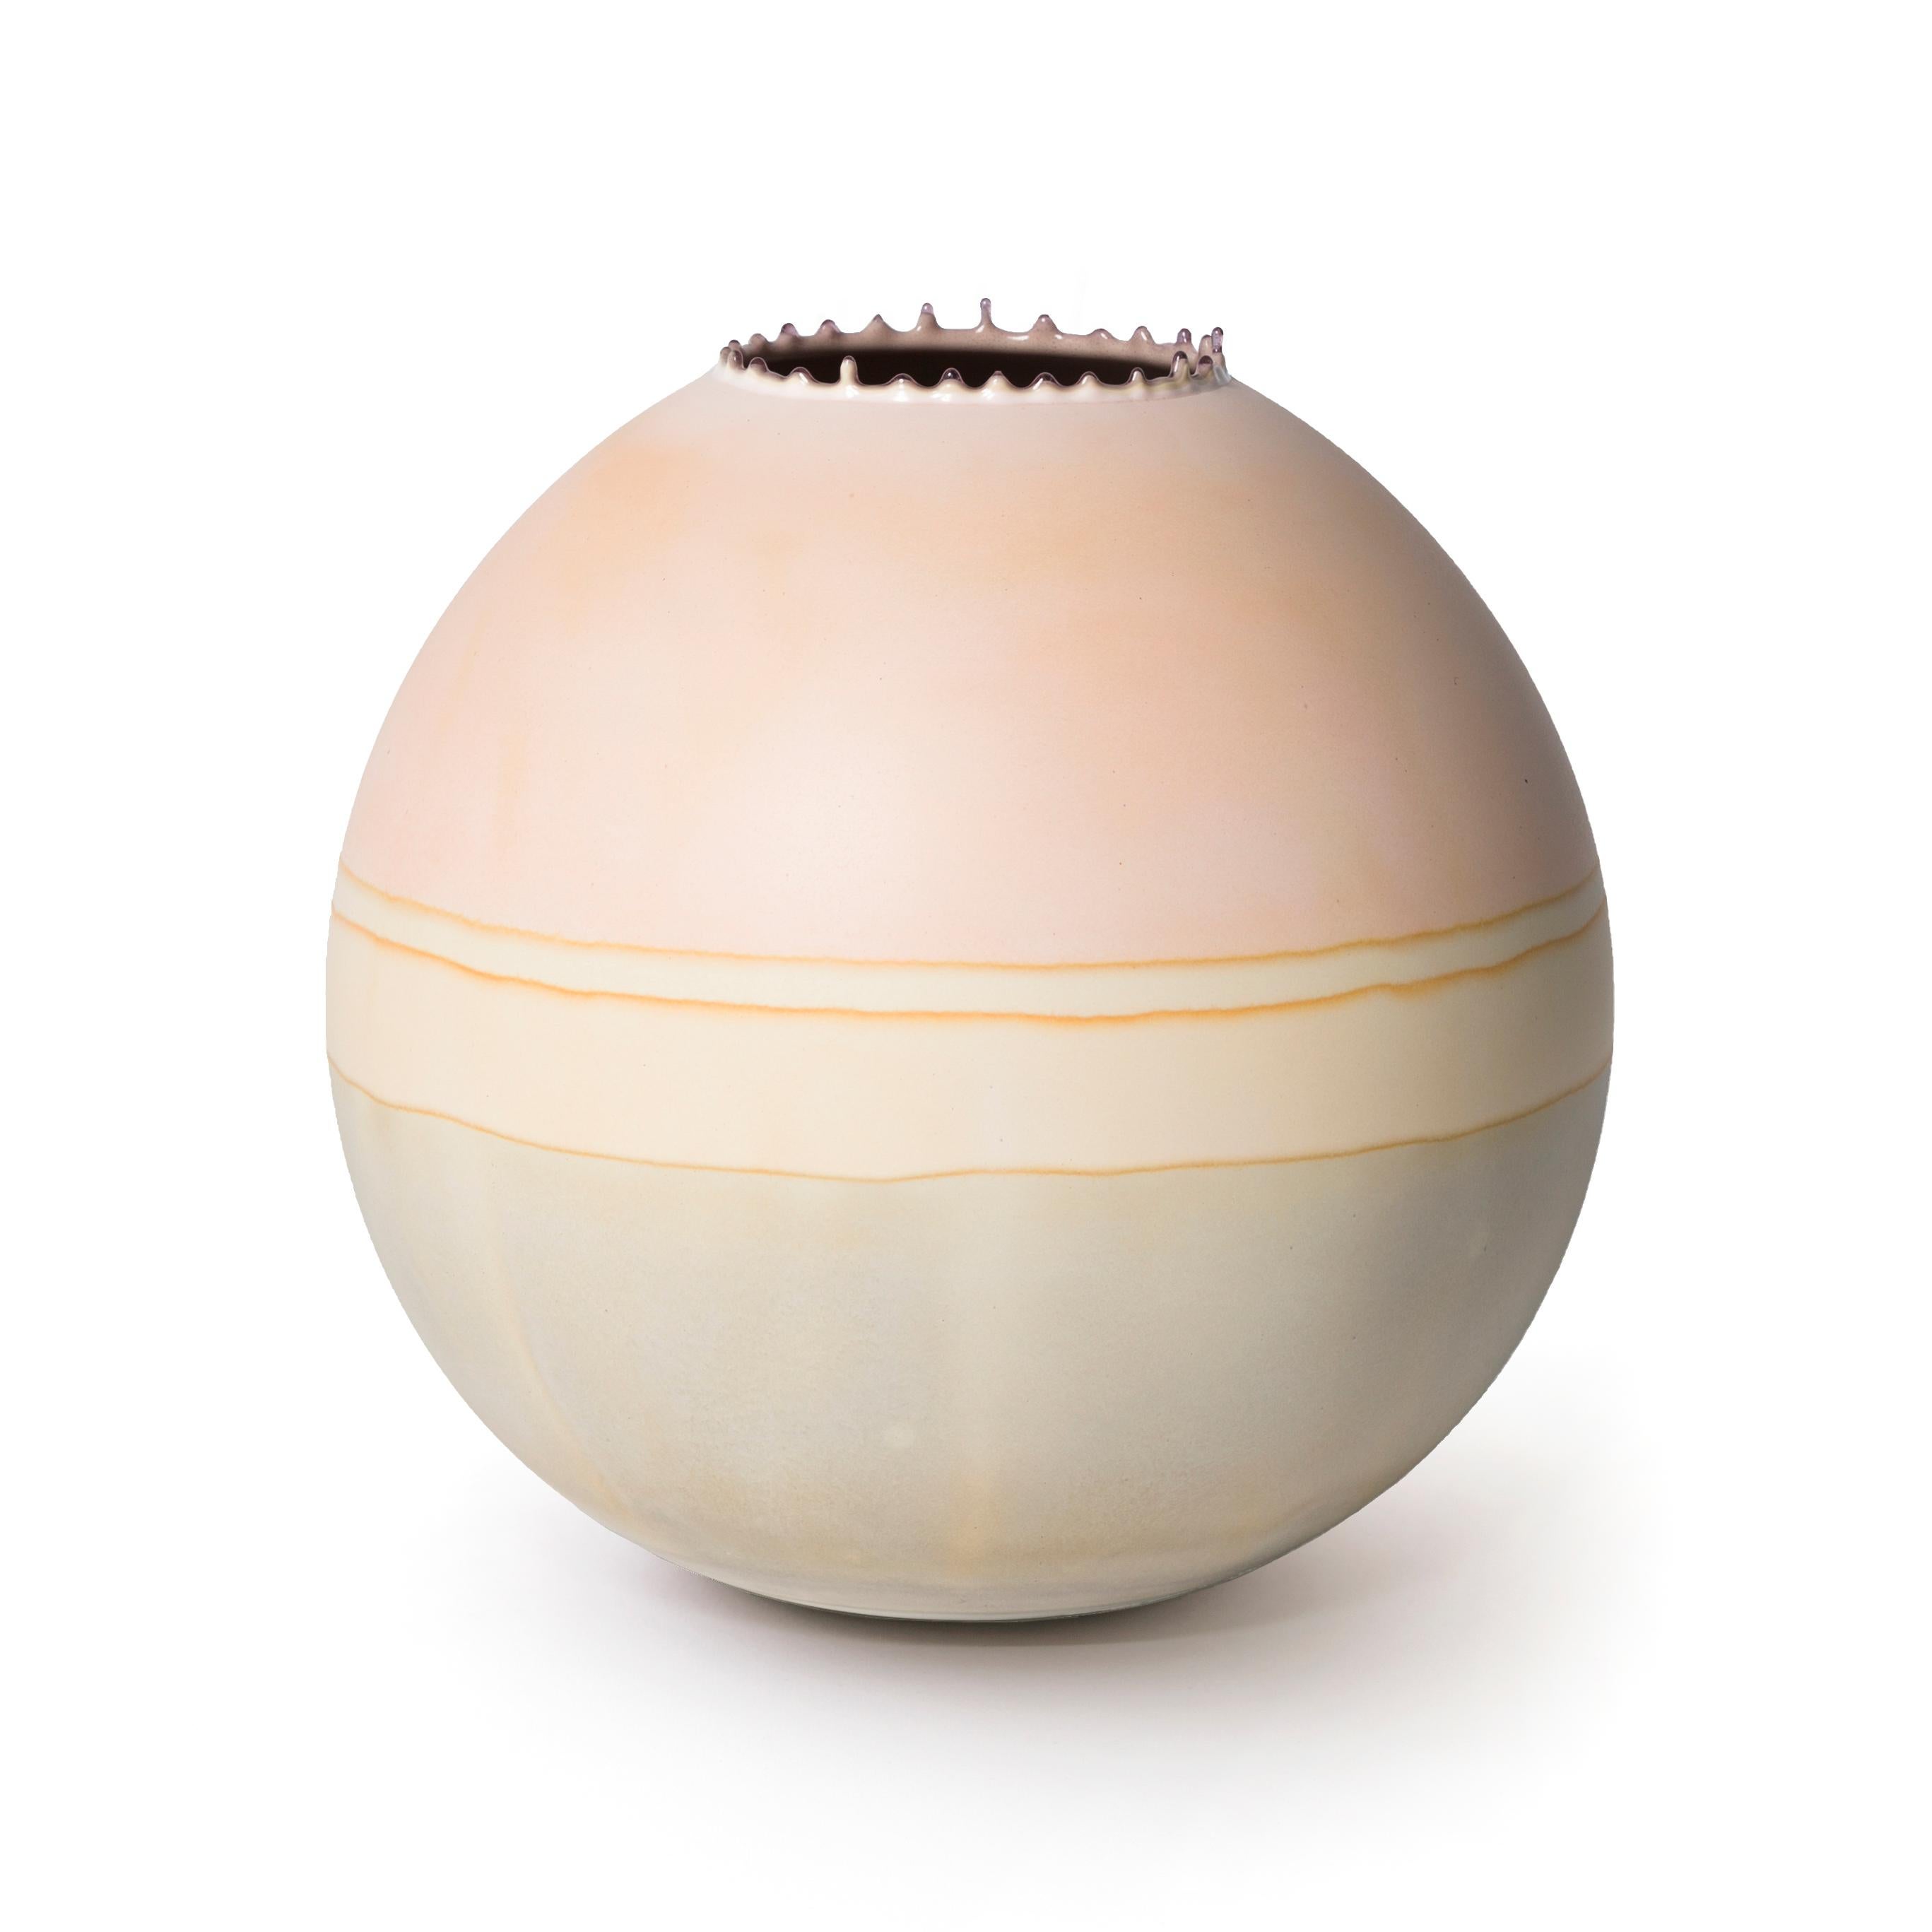 Peach and sage jupiter vase by Elyse Graham
Dimensions: W 28 x D 28 x H 30.5 cm
Materials: Plaster, Resin
Molded, dyed, and finished by hand in LA. customization
Available.
All pieces are made to order

This collection of vessels is inspired